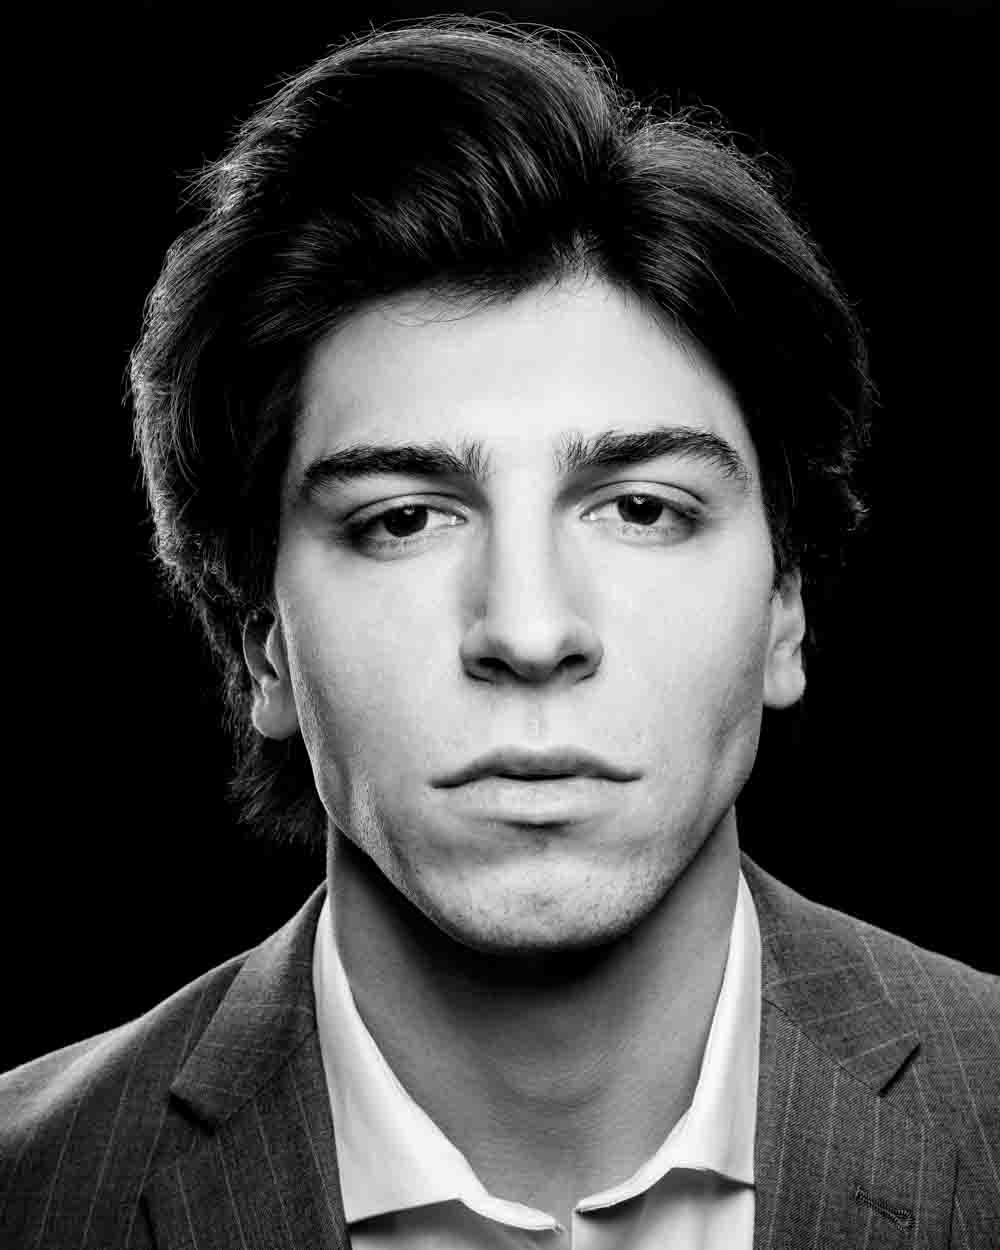 Noah in a dramatic black and white setting, emphasizing strong character portrayal thanks to a Chicago headshot photographer